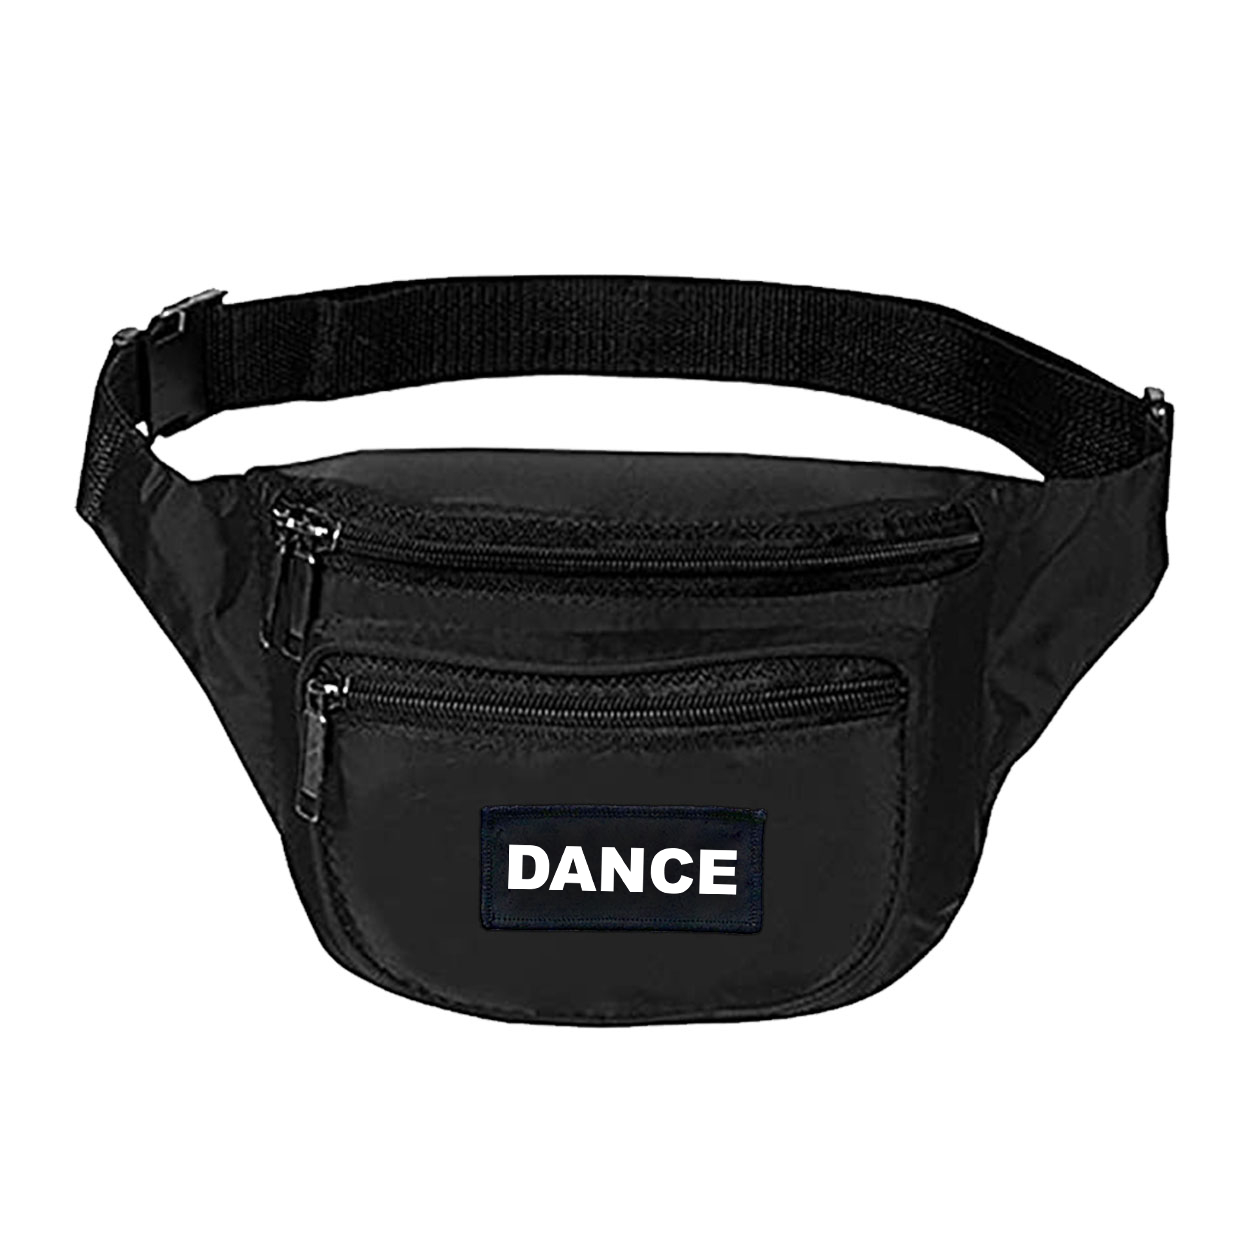 Dance Brand Logo Night Out Woven Patch Fanny Pack Black